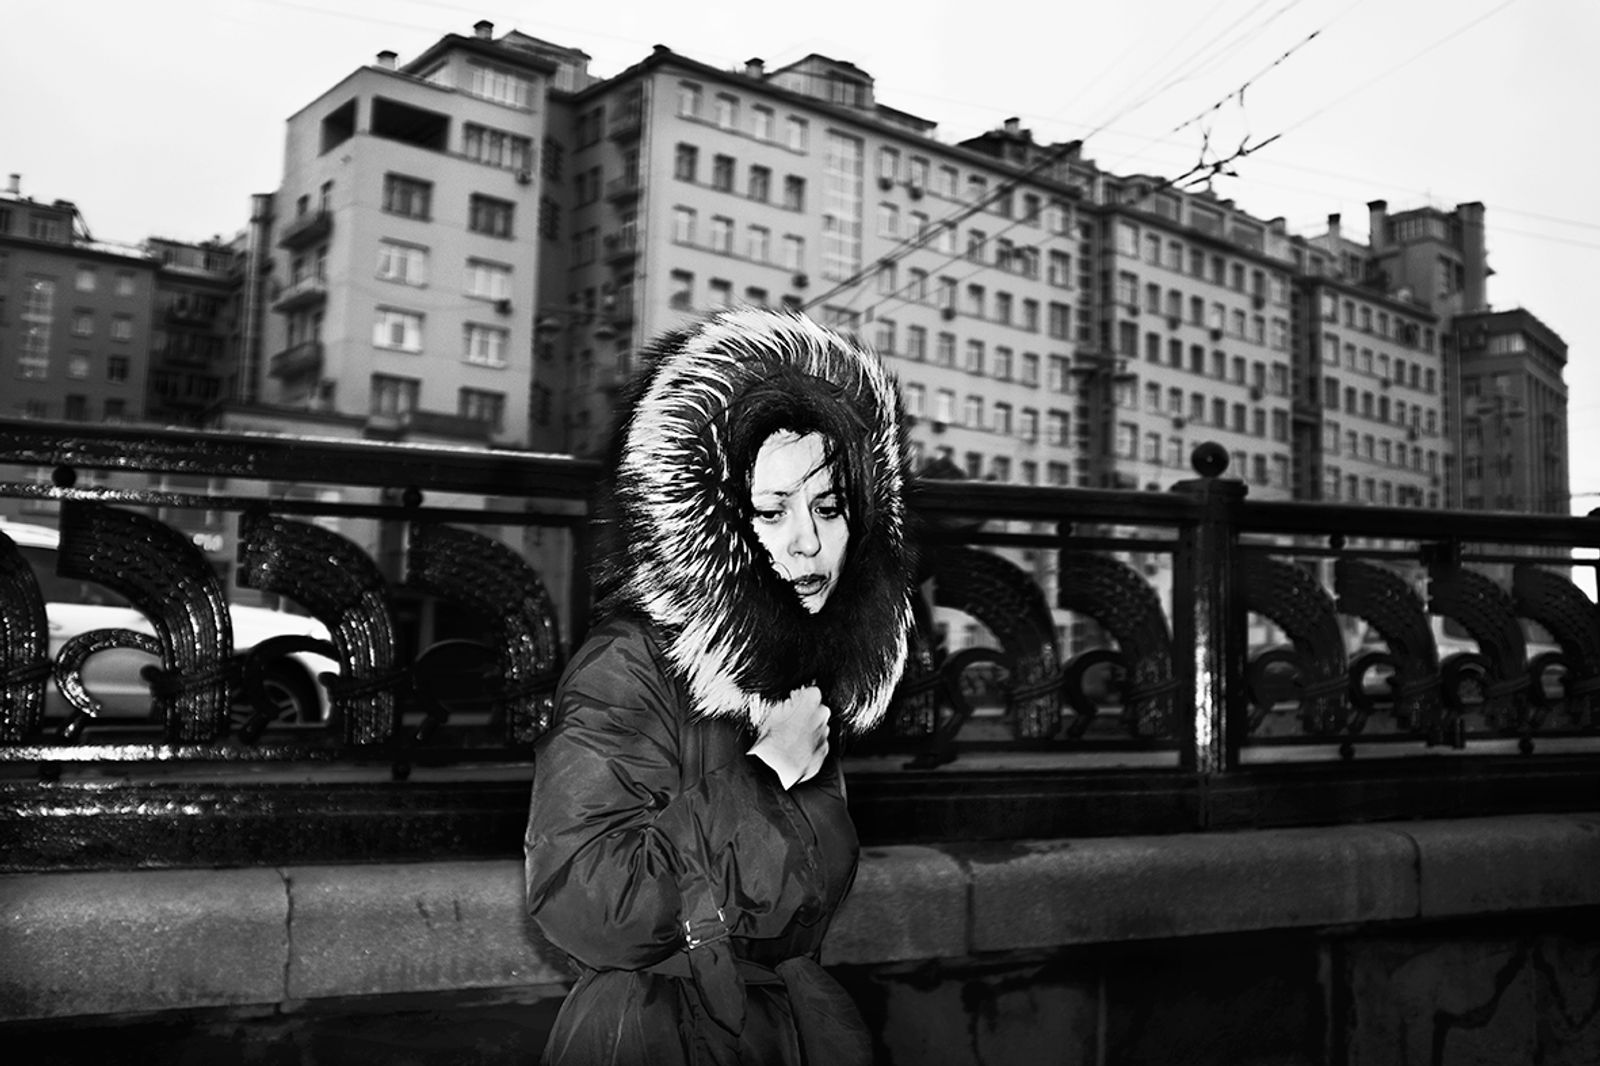 © Sara Zanella - Image from the The Way Home, Russia photography project